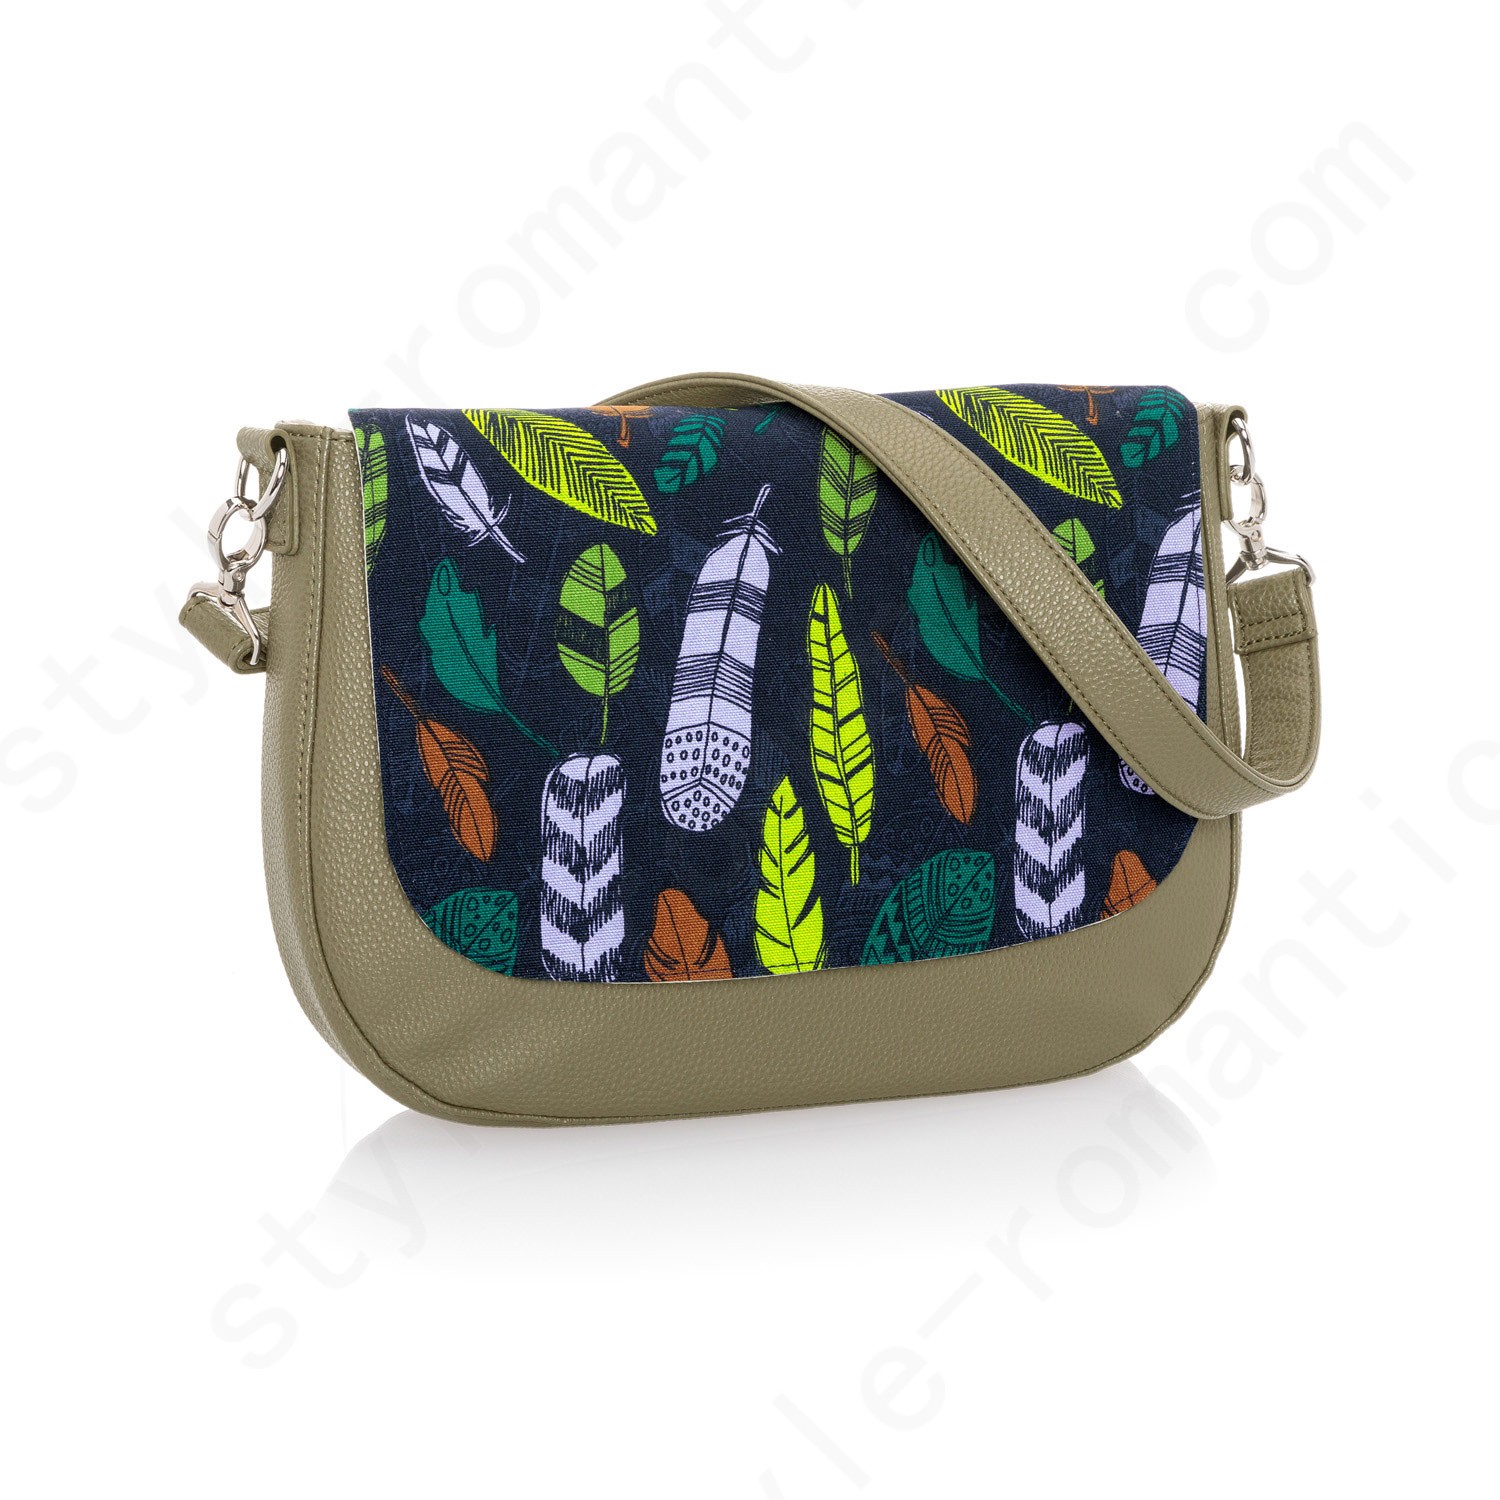 Thirty-One Gifts Studio Thirty-One Classic - Ooh-La-La Olive Pebble W/ Falling Feathers Bag Accessories - Thirty-One Gifts Studio Thirty-One Classic - Ooh-La-La Olive Pebble W/ Falling Feathers Bag Accessories